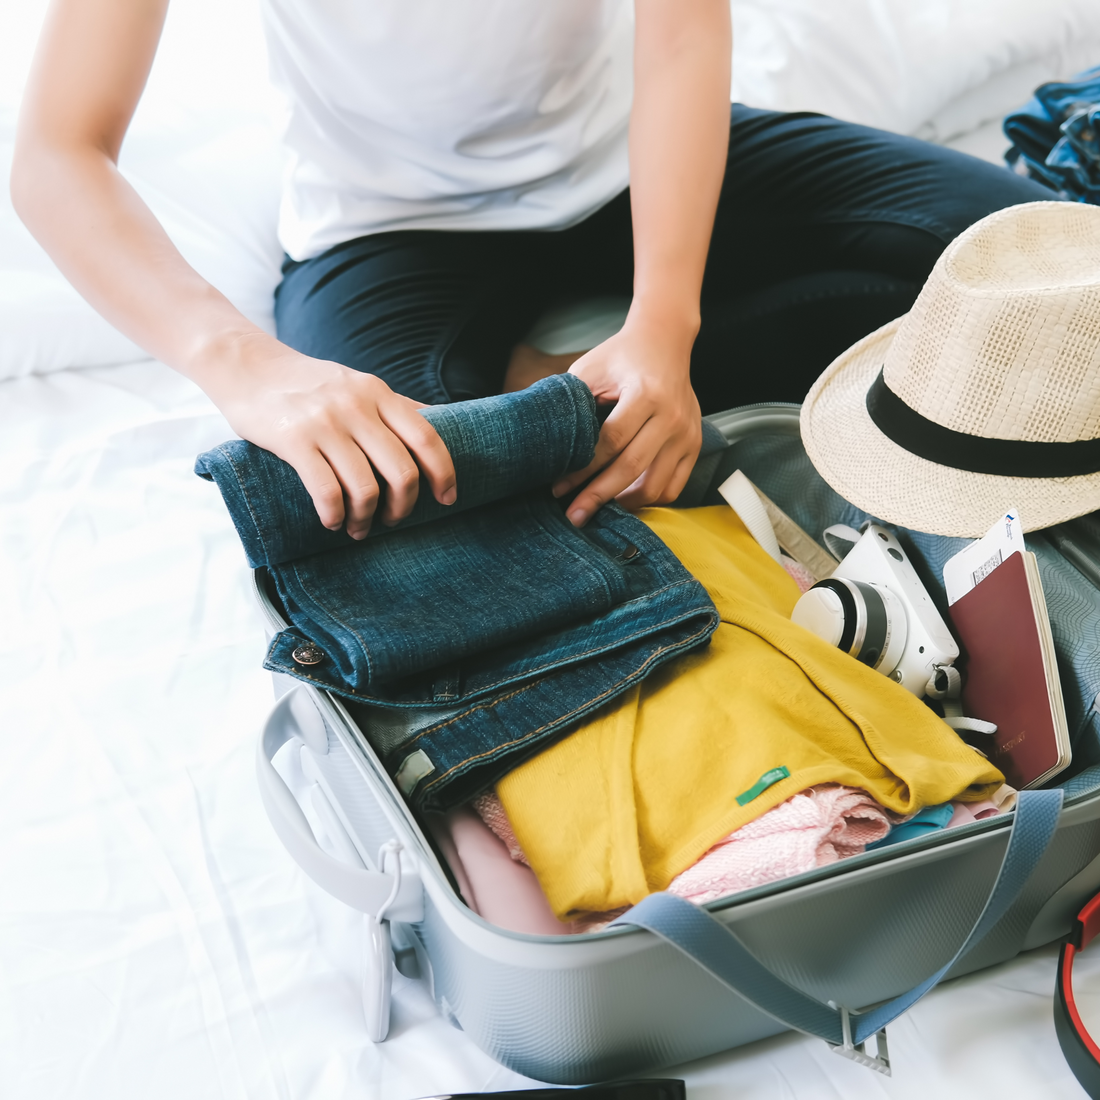 5 Essential Tips to Stay Organized While Traveling